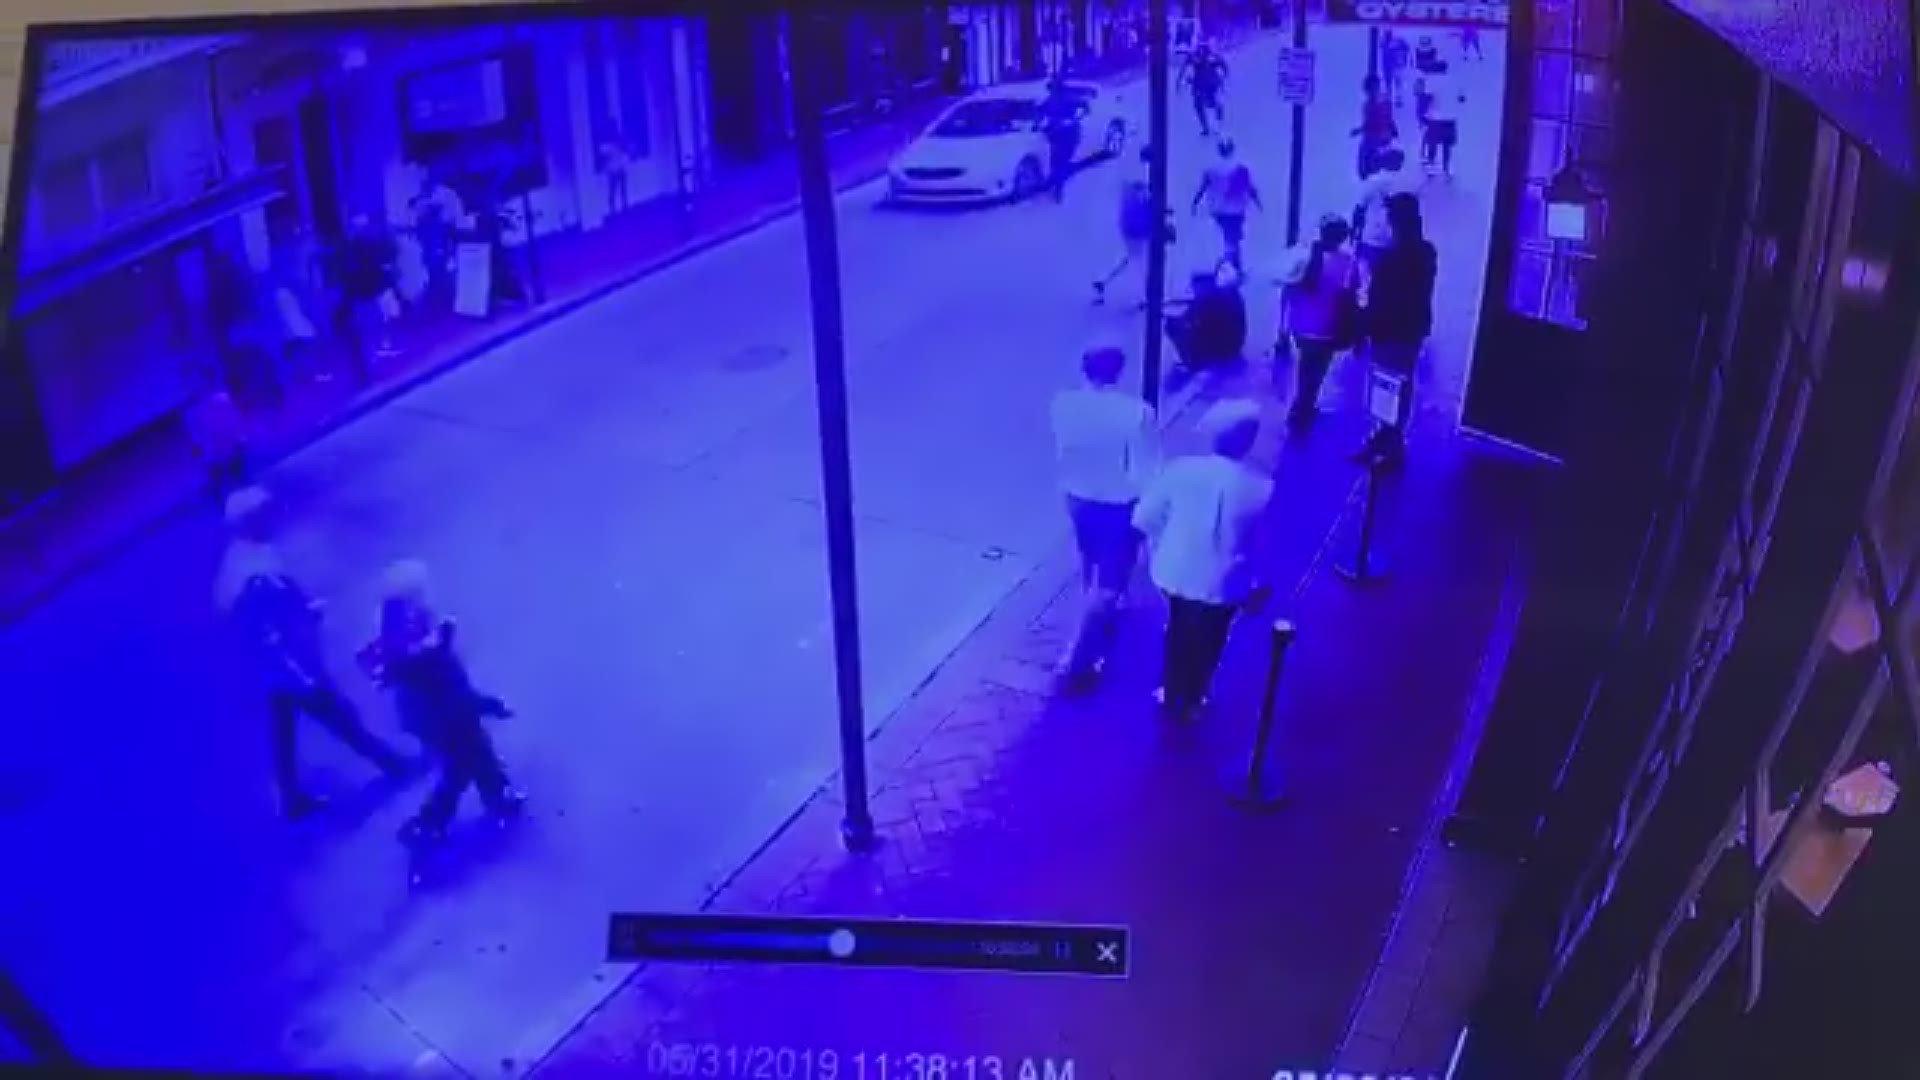 A surveillance video from Bourbon Street shows a driver going the wrong way down the street with a couple of what appear to be State Troopers following, trying to get him to stop.